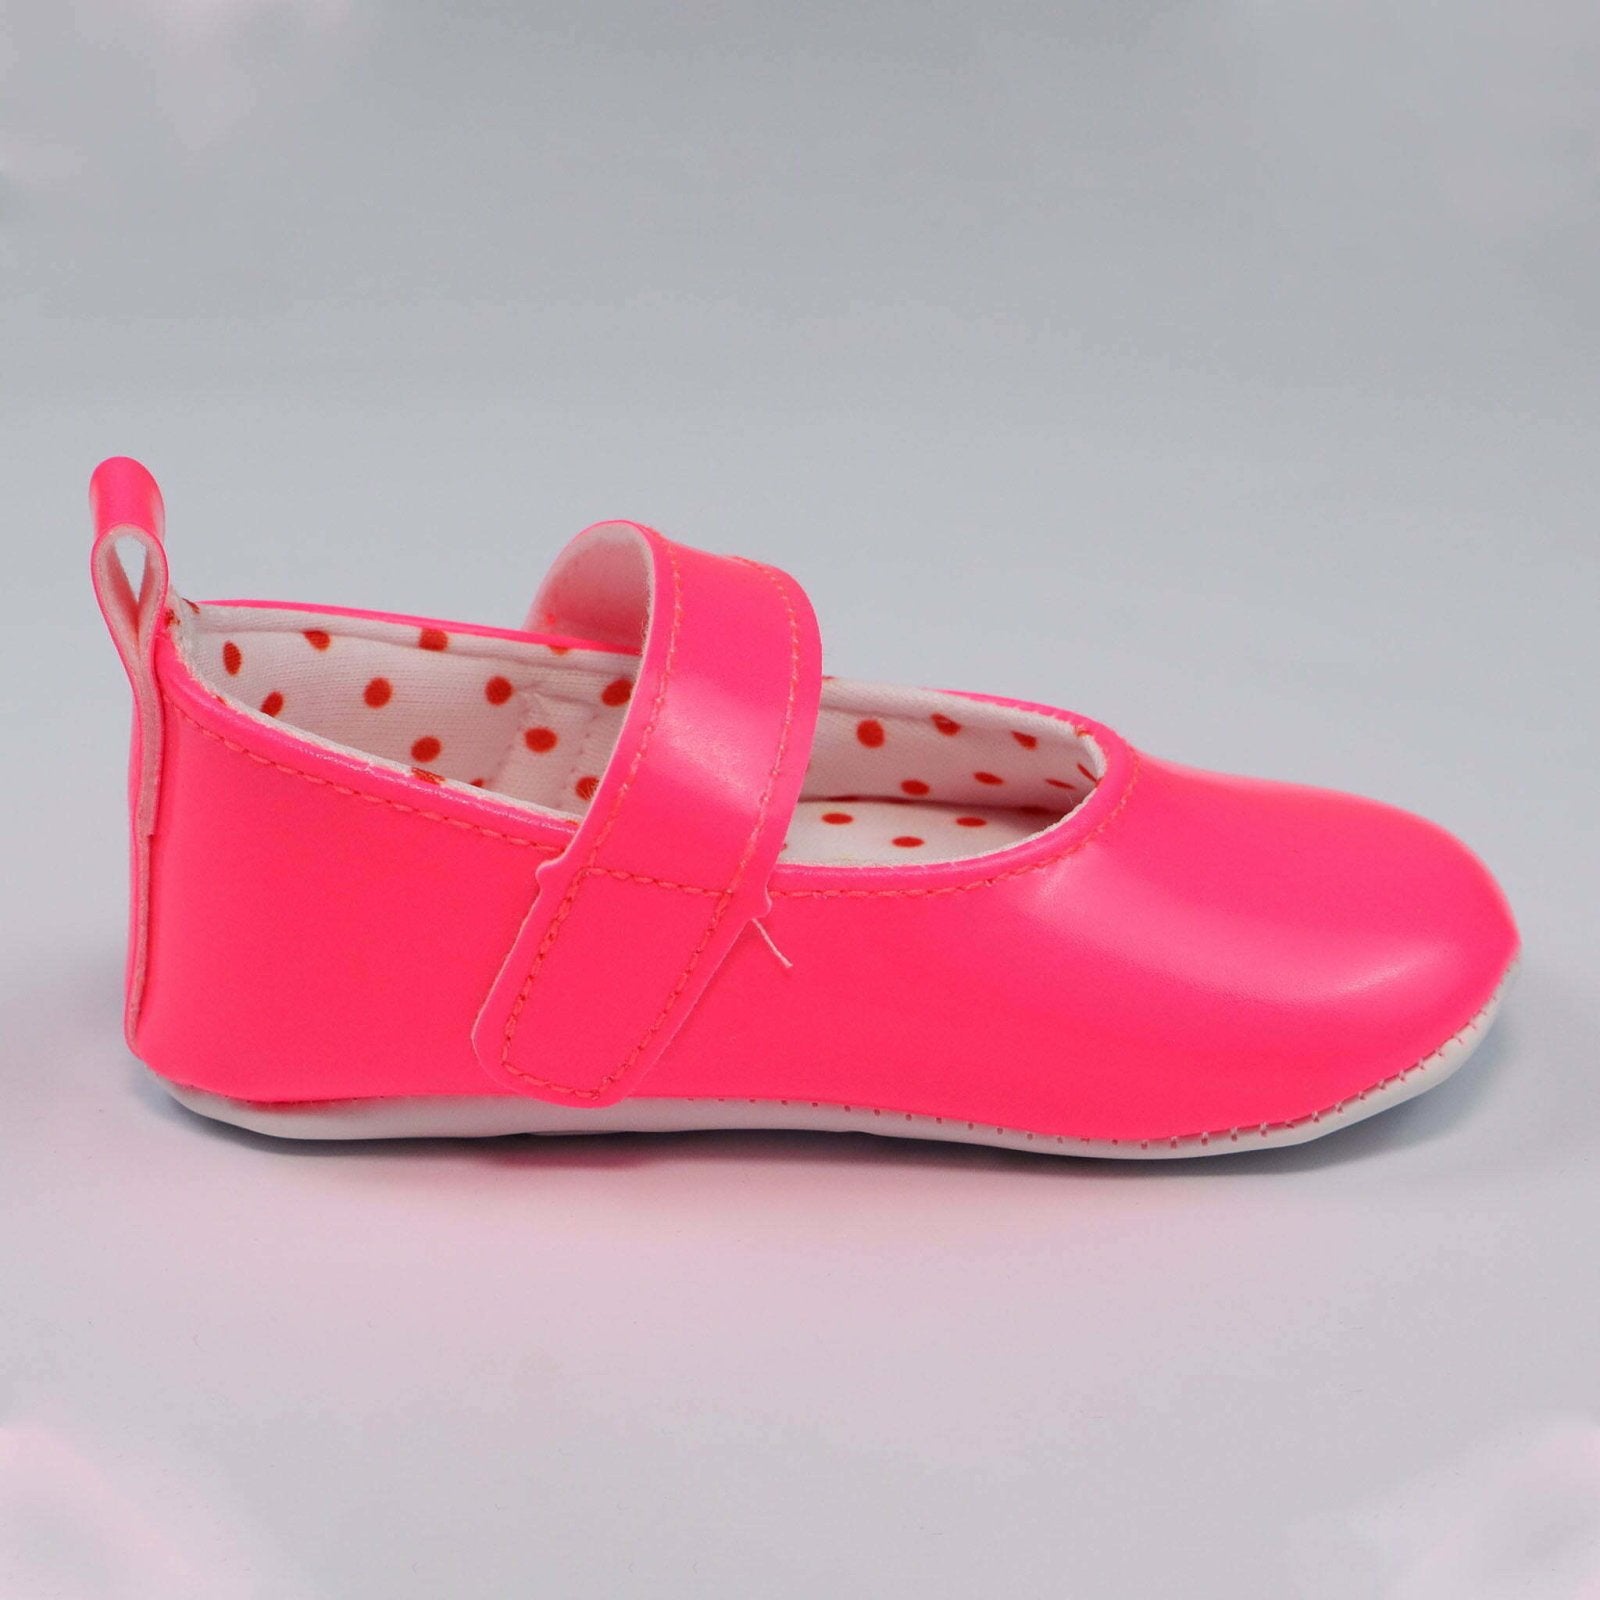 Baby Shoes Pink Color by Baby Pattini